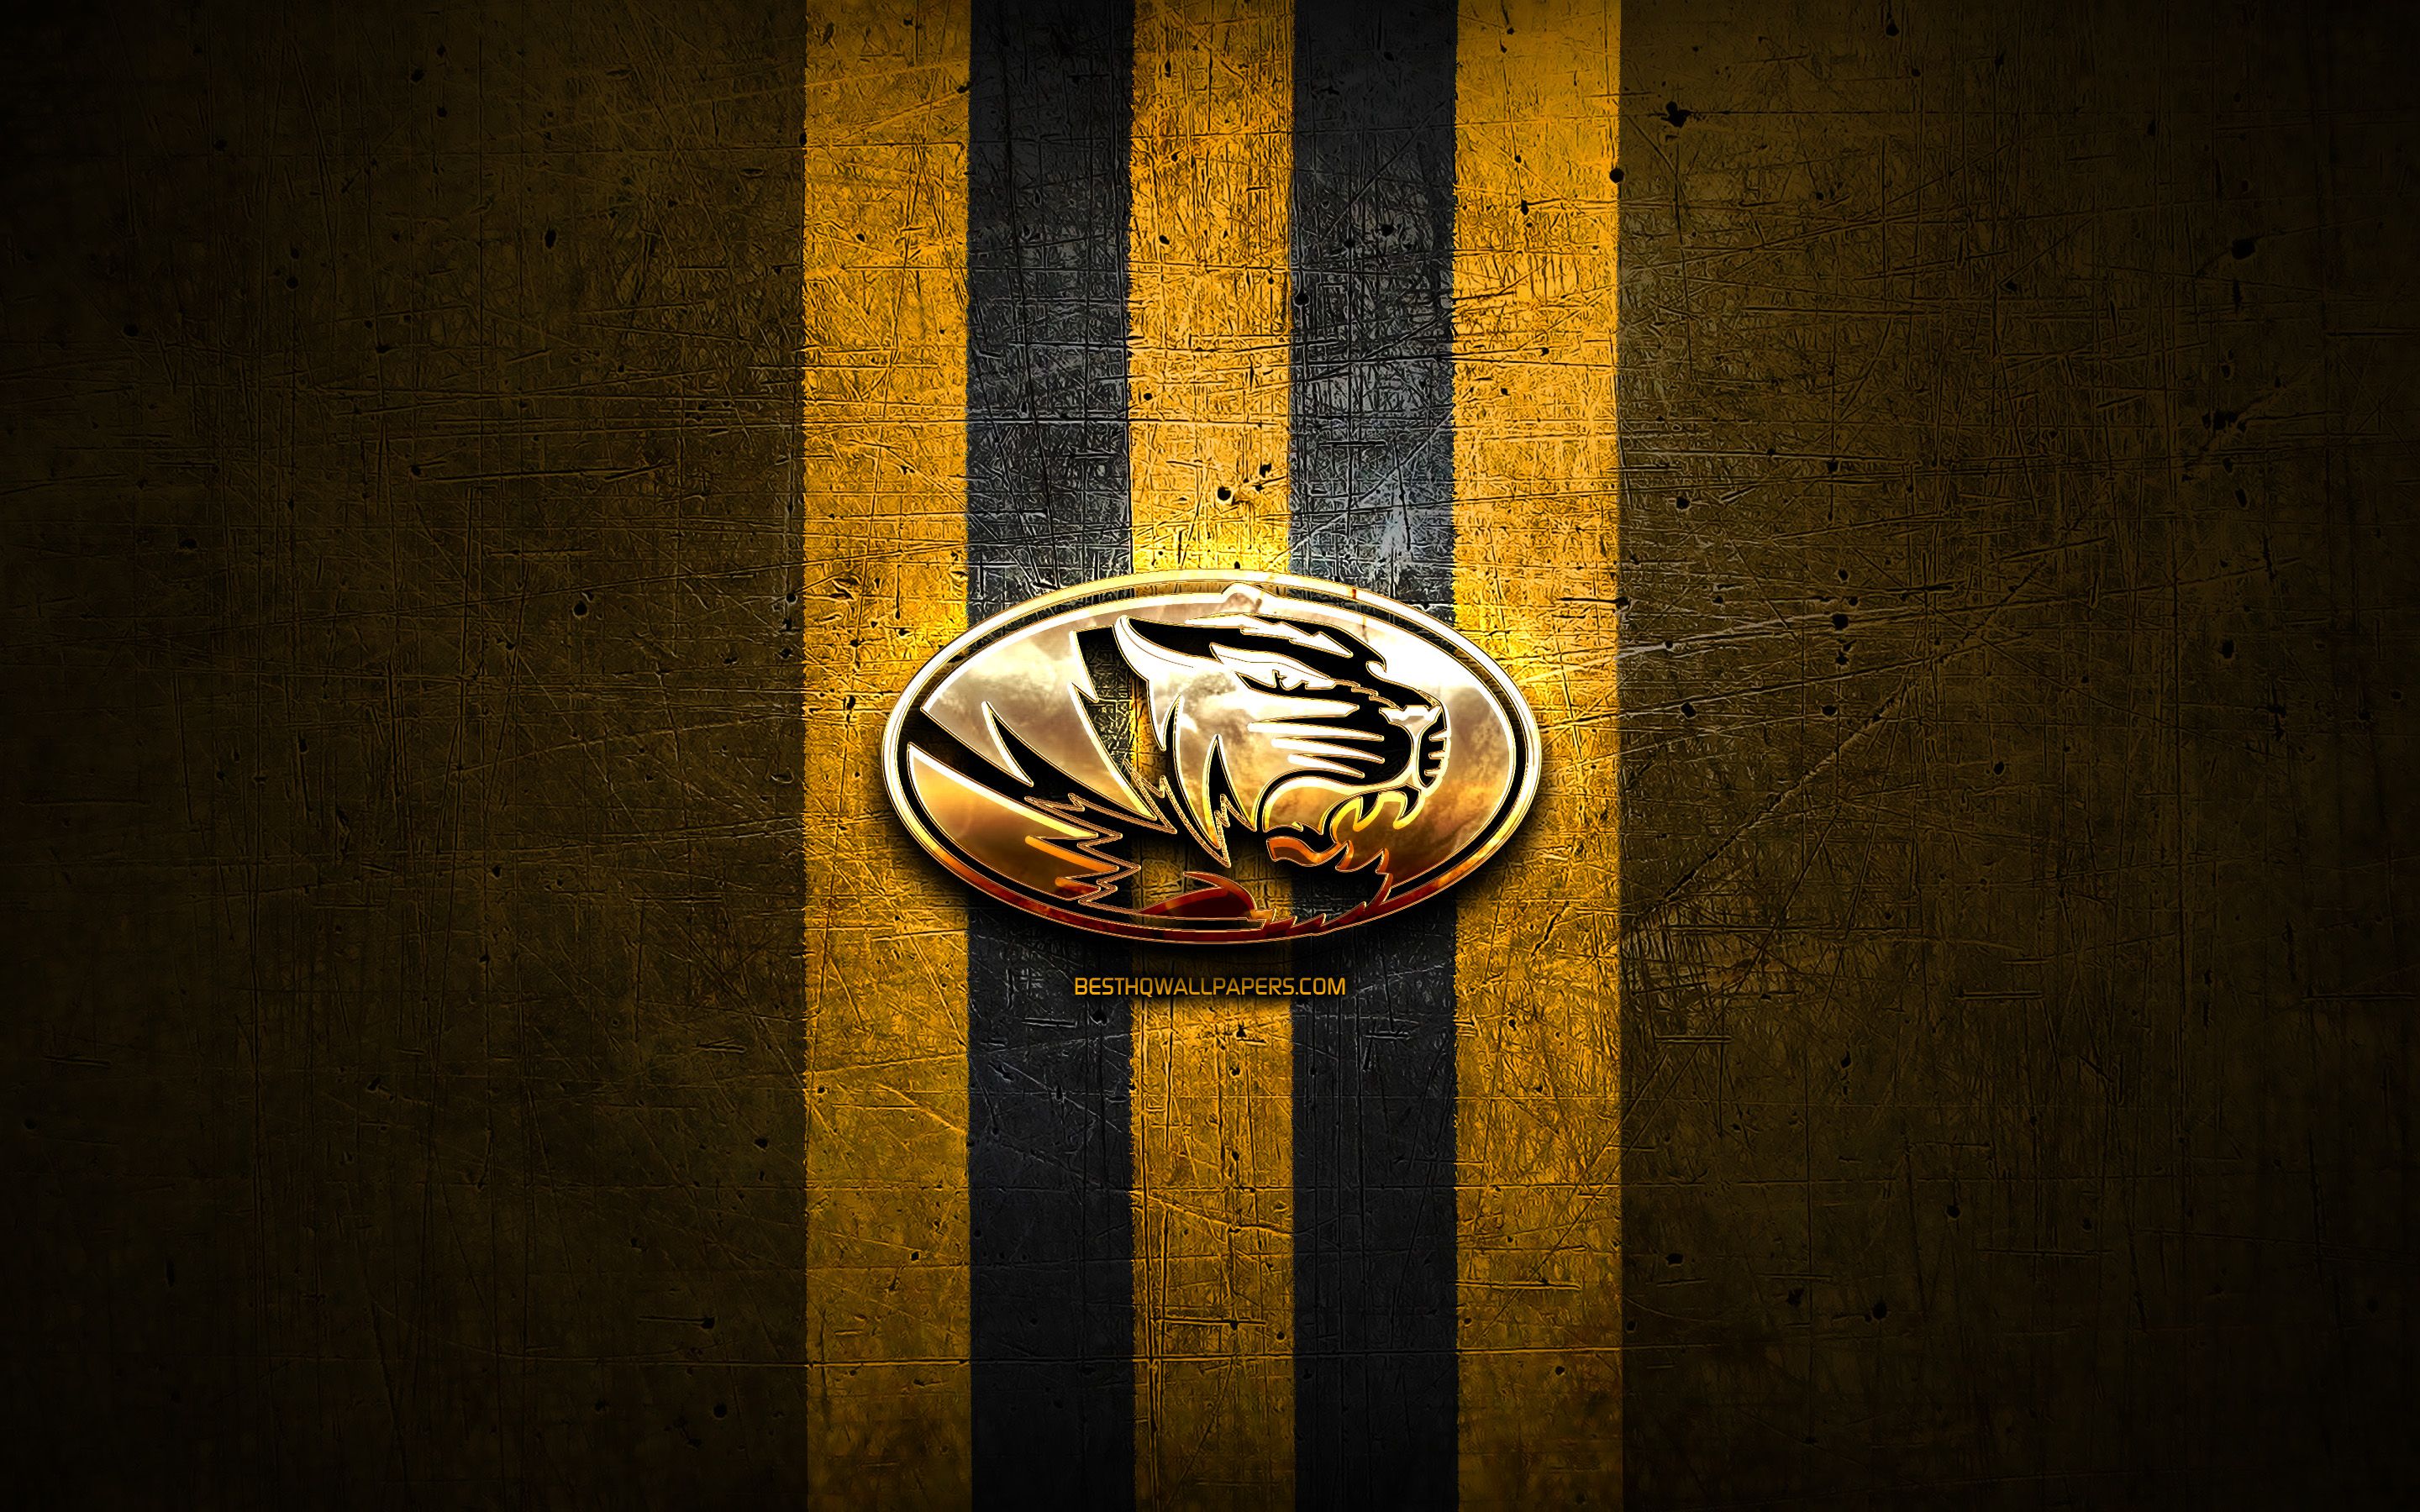 Download wallpaper Missouri Tigers, golden logo, NCAA, yellow metal background, american football club, Missouri Tigers logo, american football, USA for desktop with resolution 2880x1800. High Quality HD picture wallpaper